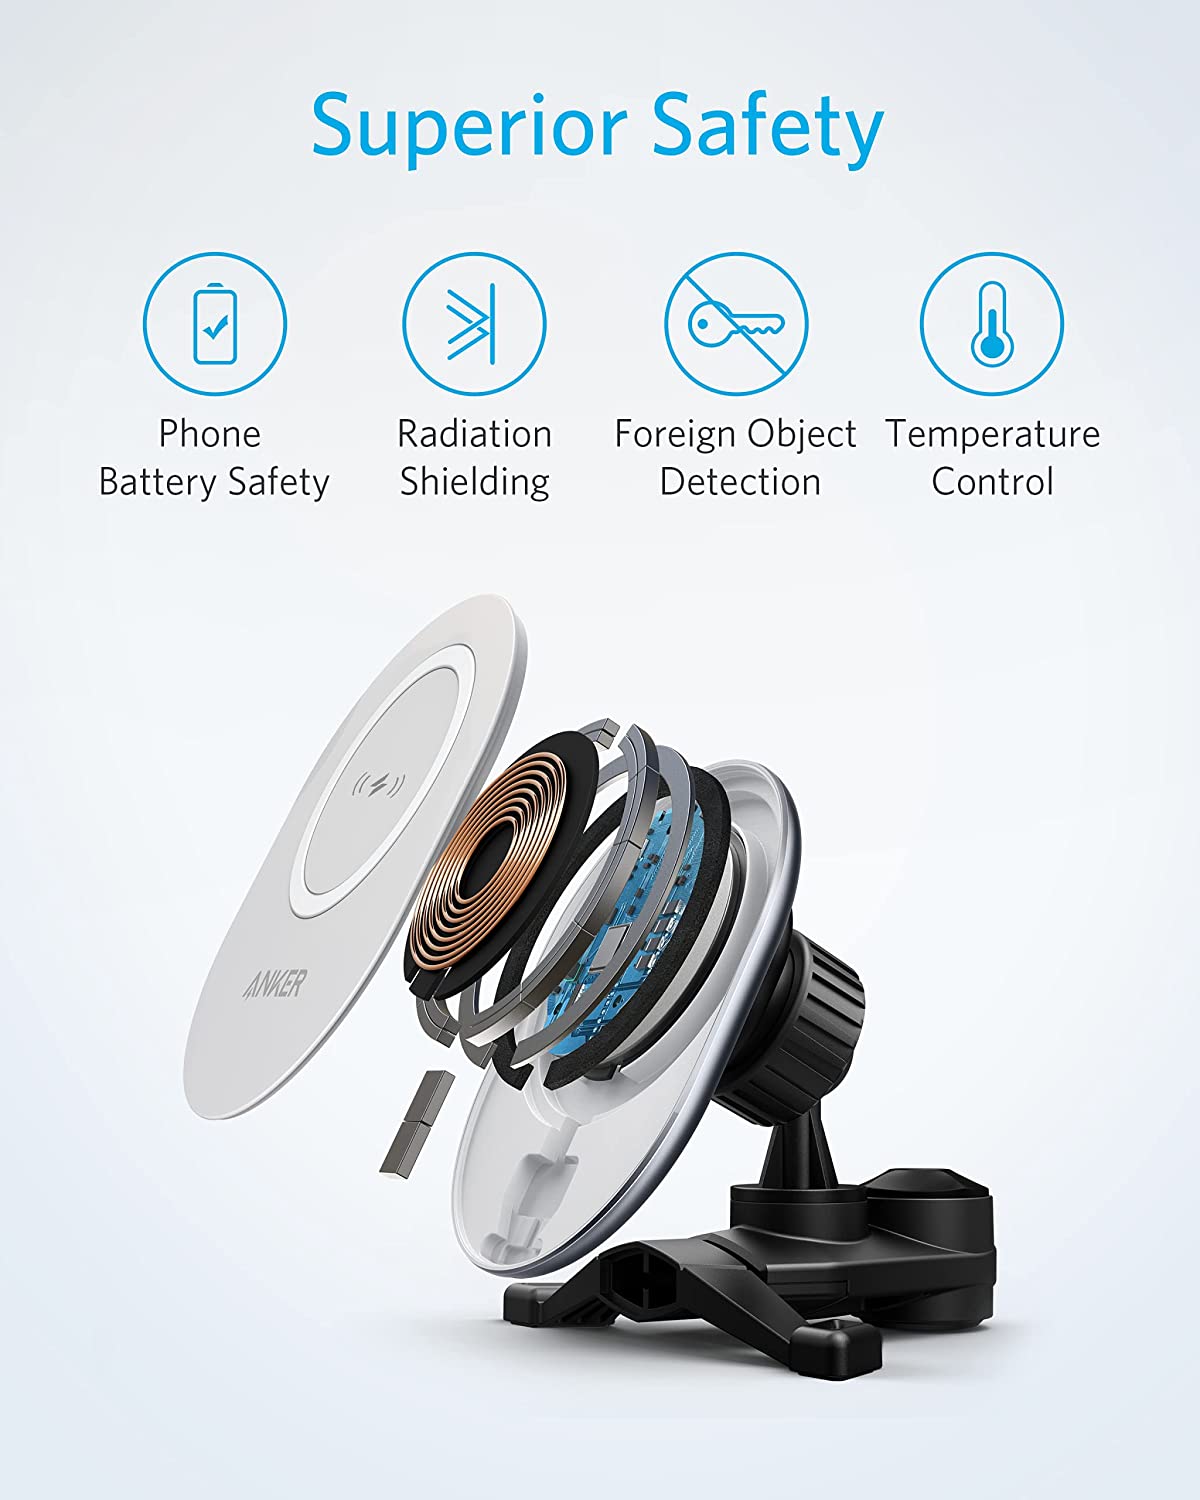 Anker PowerWave Magnetic Charging Car Mount, Black+White with 18 months official warranty